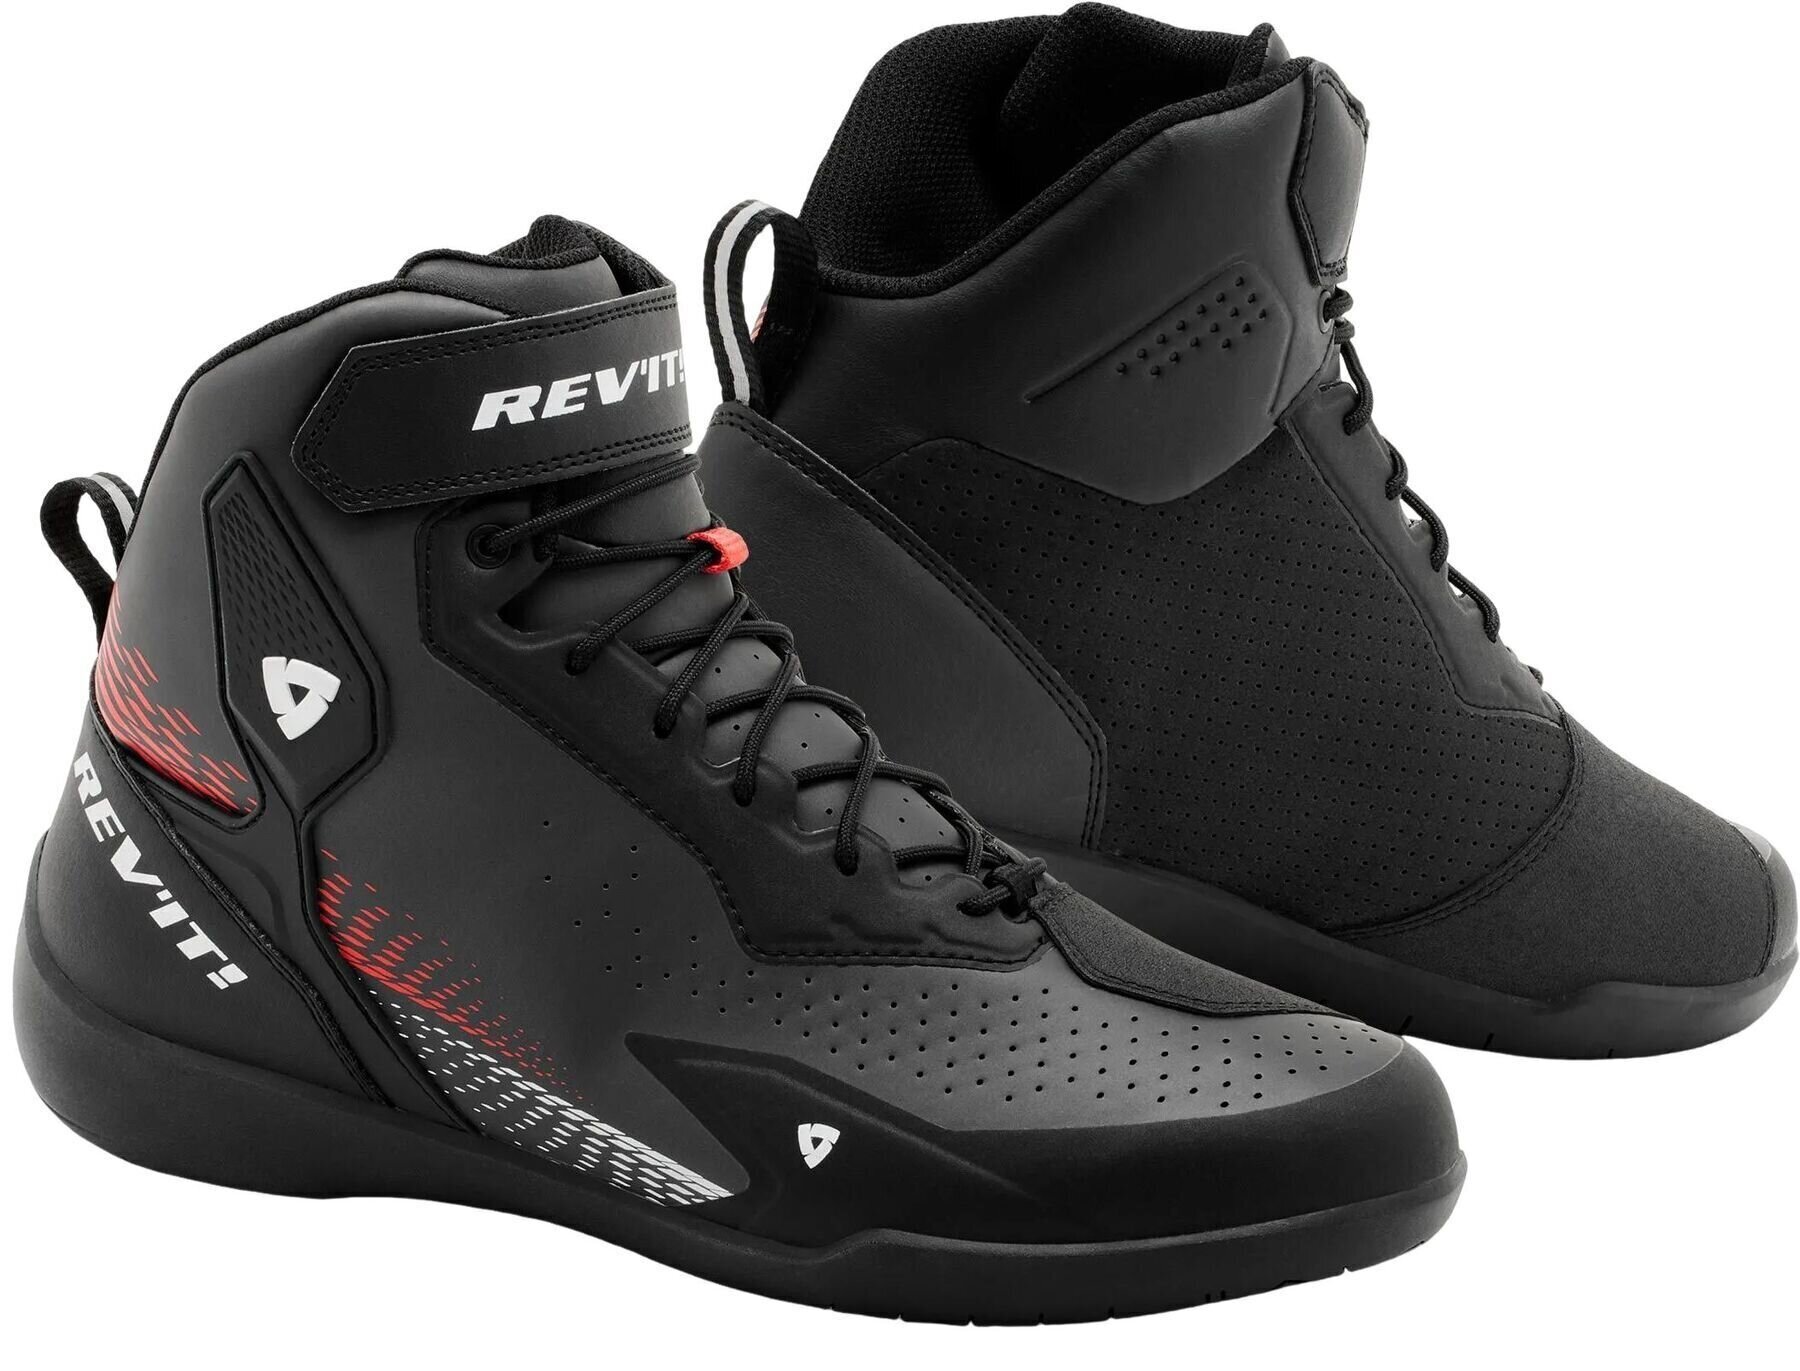 Boty Rev'it! Shoes G-Force 2 Black/Neon Red 46 Boty